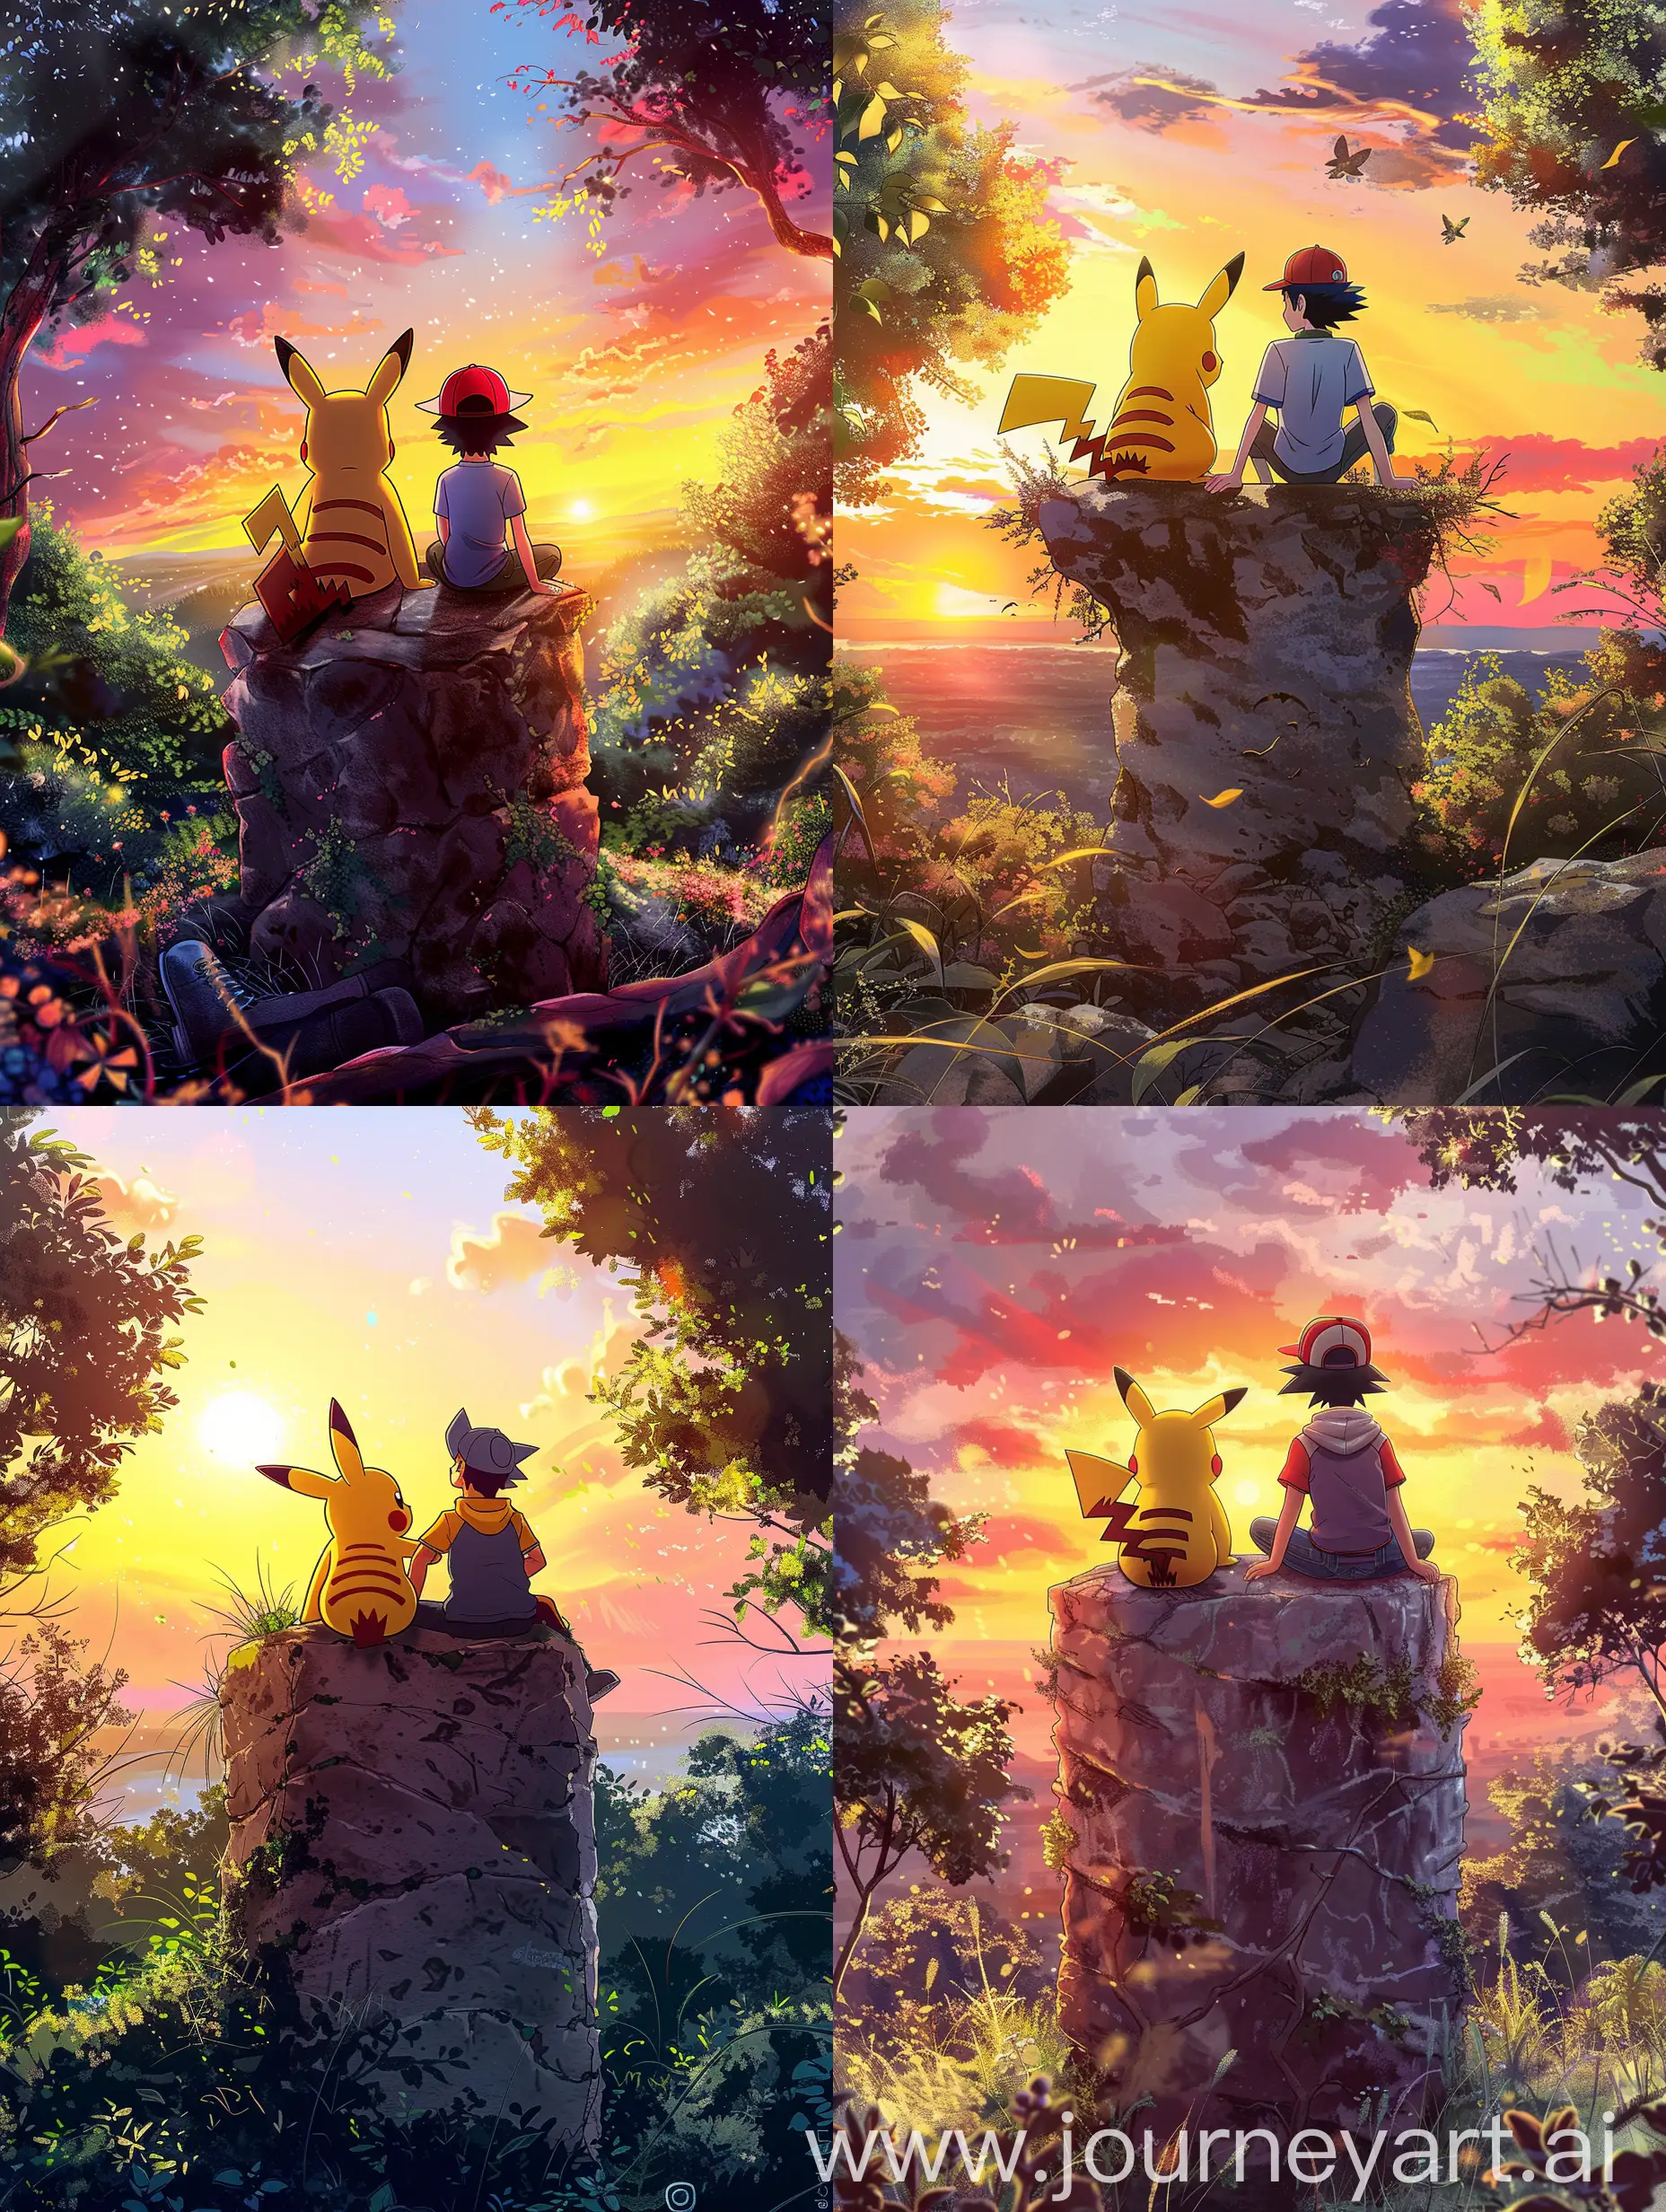 Pikachu and ash ketchum form the Pokemon anime series sitting on a rock pillar viewing sunset,make some trees around,a little bit of grass,beautiful summers,beautiful anime style,makato shinkai style,avoid bad view pikachu and ash ketchum,avoid distorted view of pikachu and ash ketchum,avoid missing fingers,perfection,back view,best and perfect view